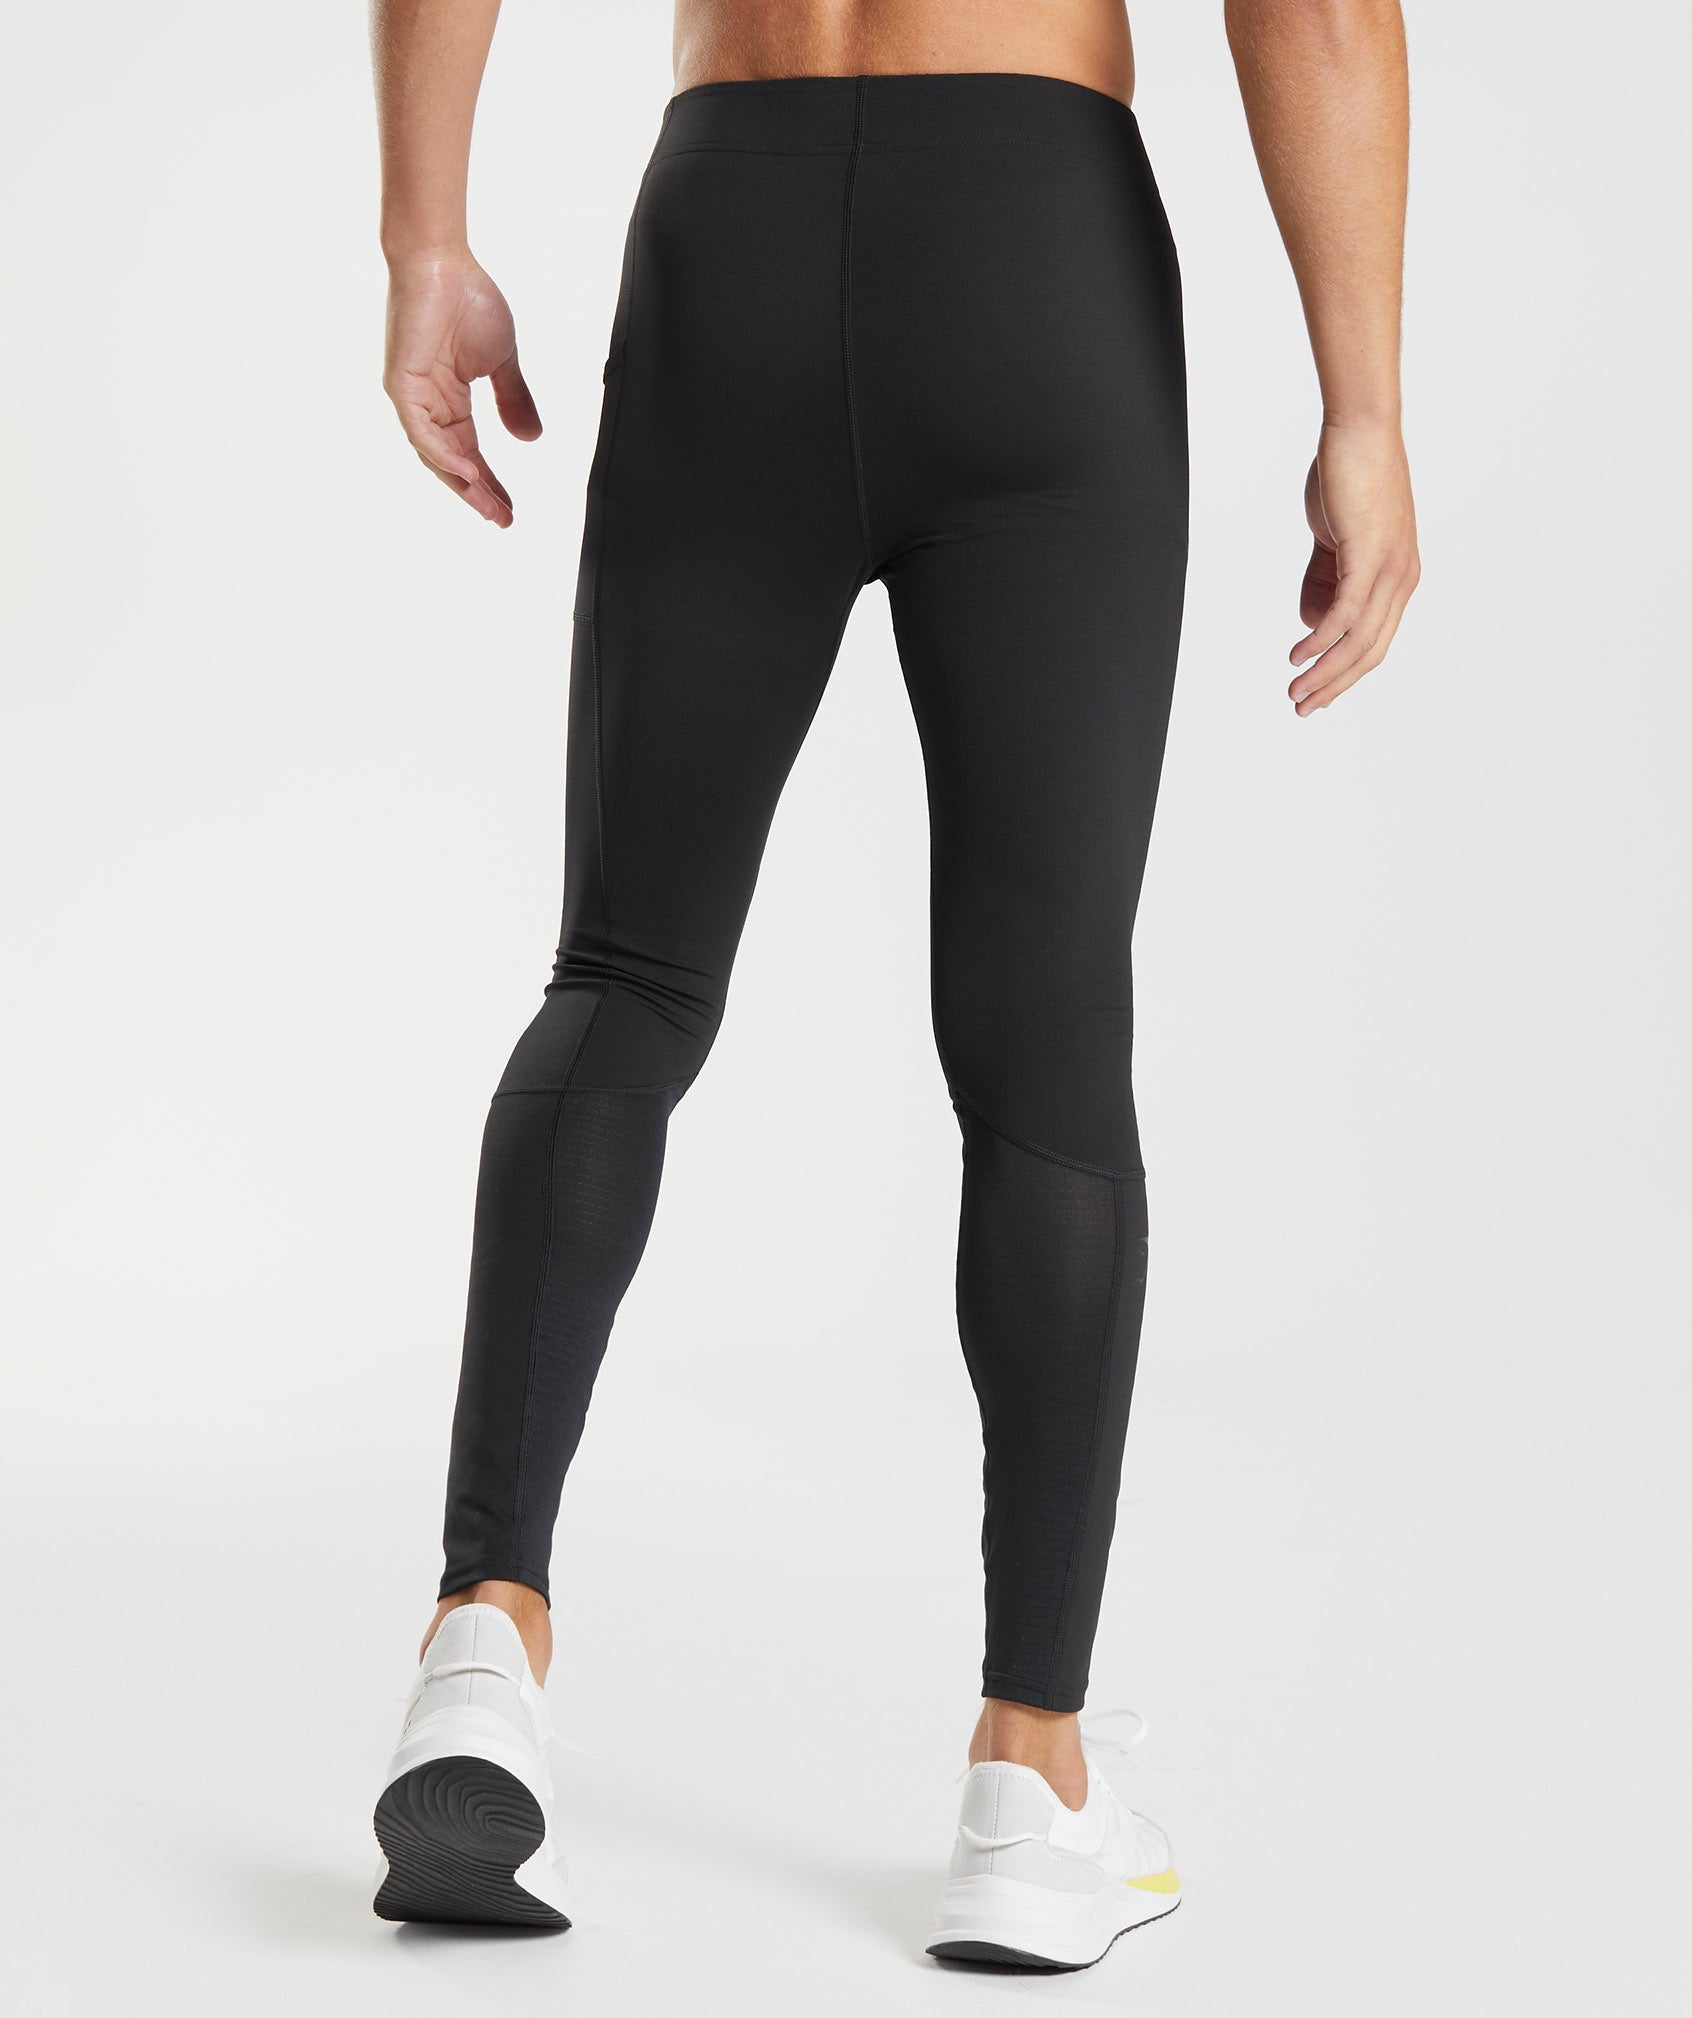 Nike Men's Running Tights, Black/Reflective Silver, S : Buy Online at Best  Price in KSA - Souq is now Amazon.sa: Fashion